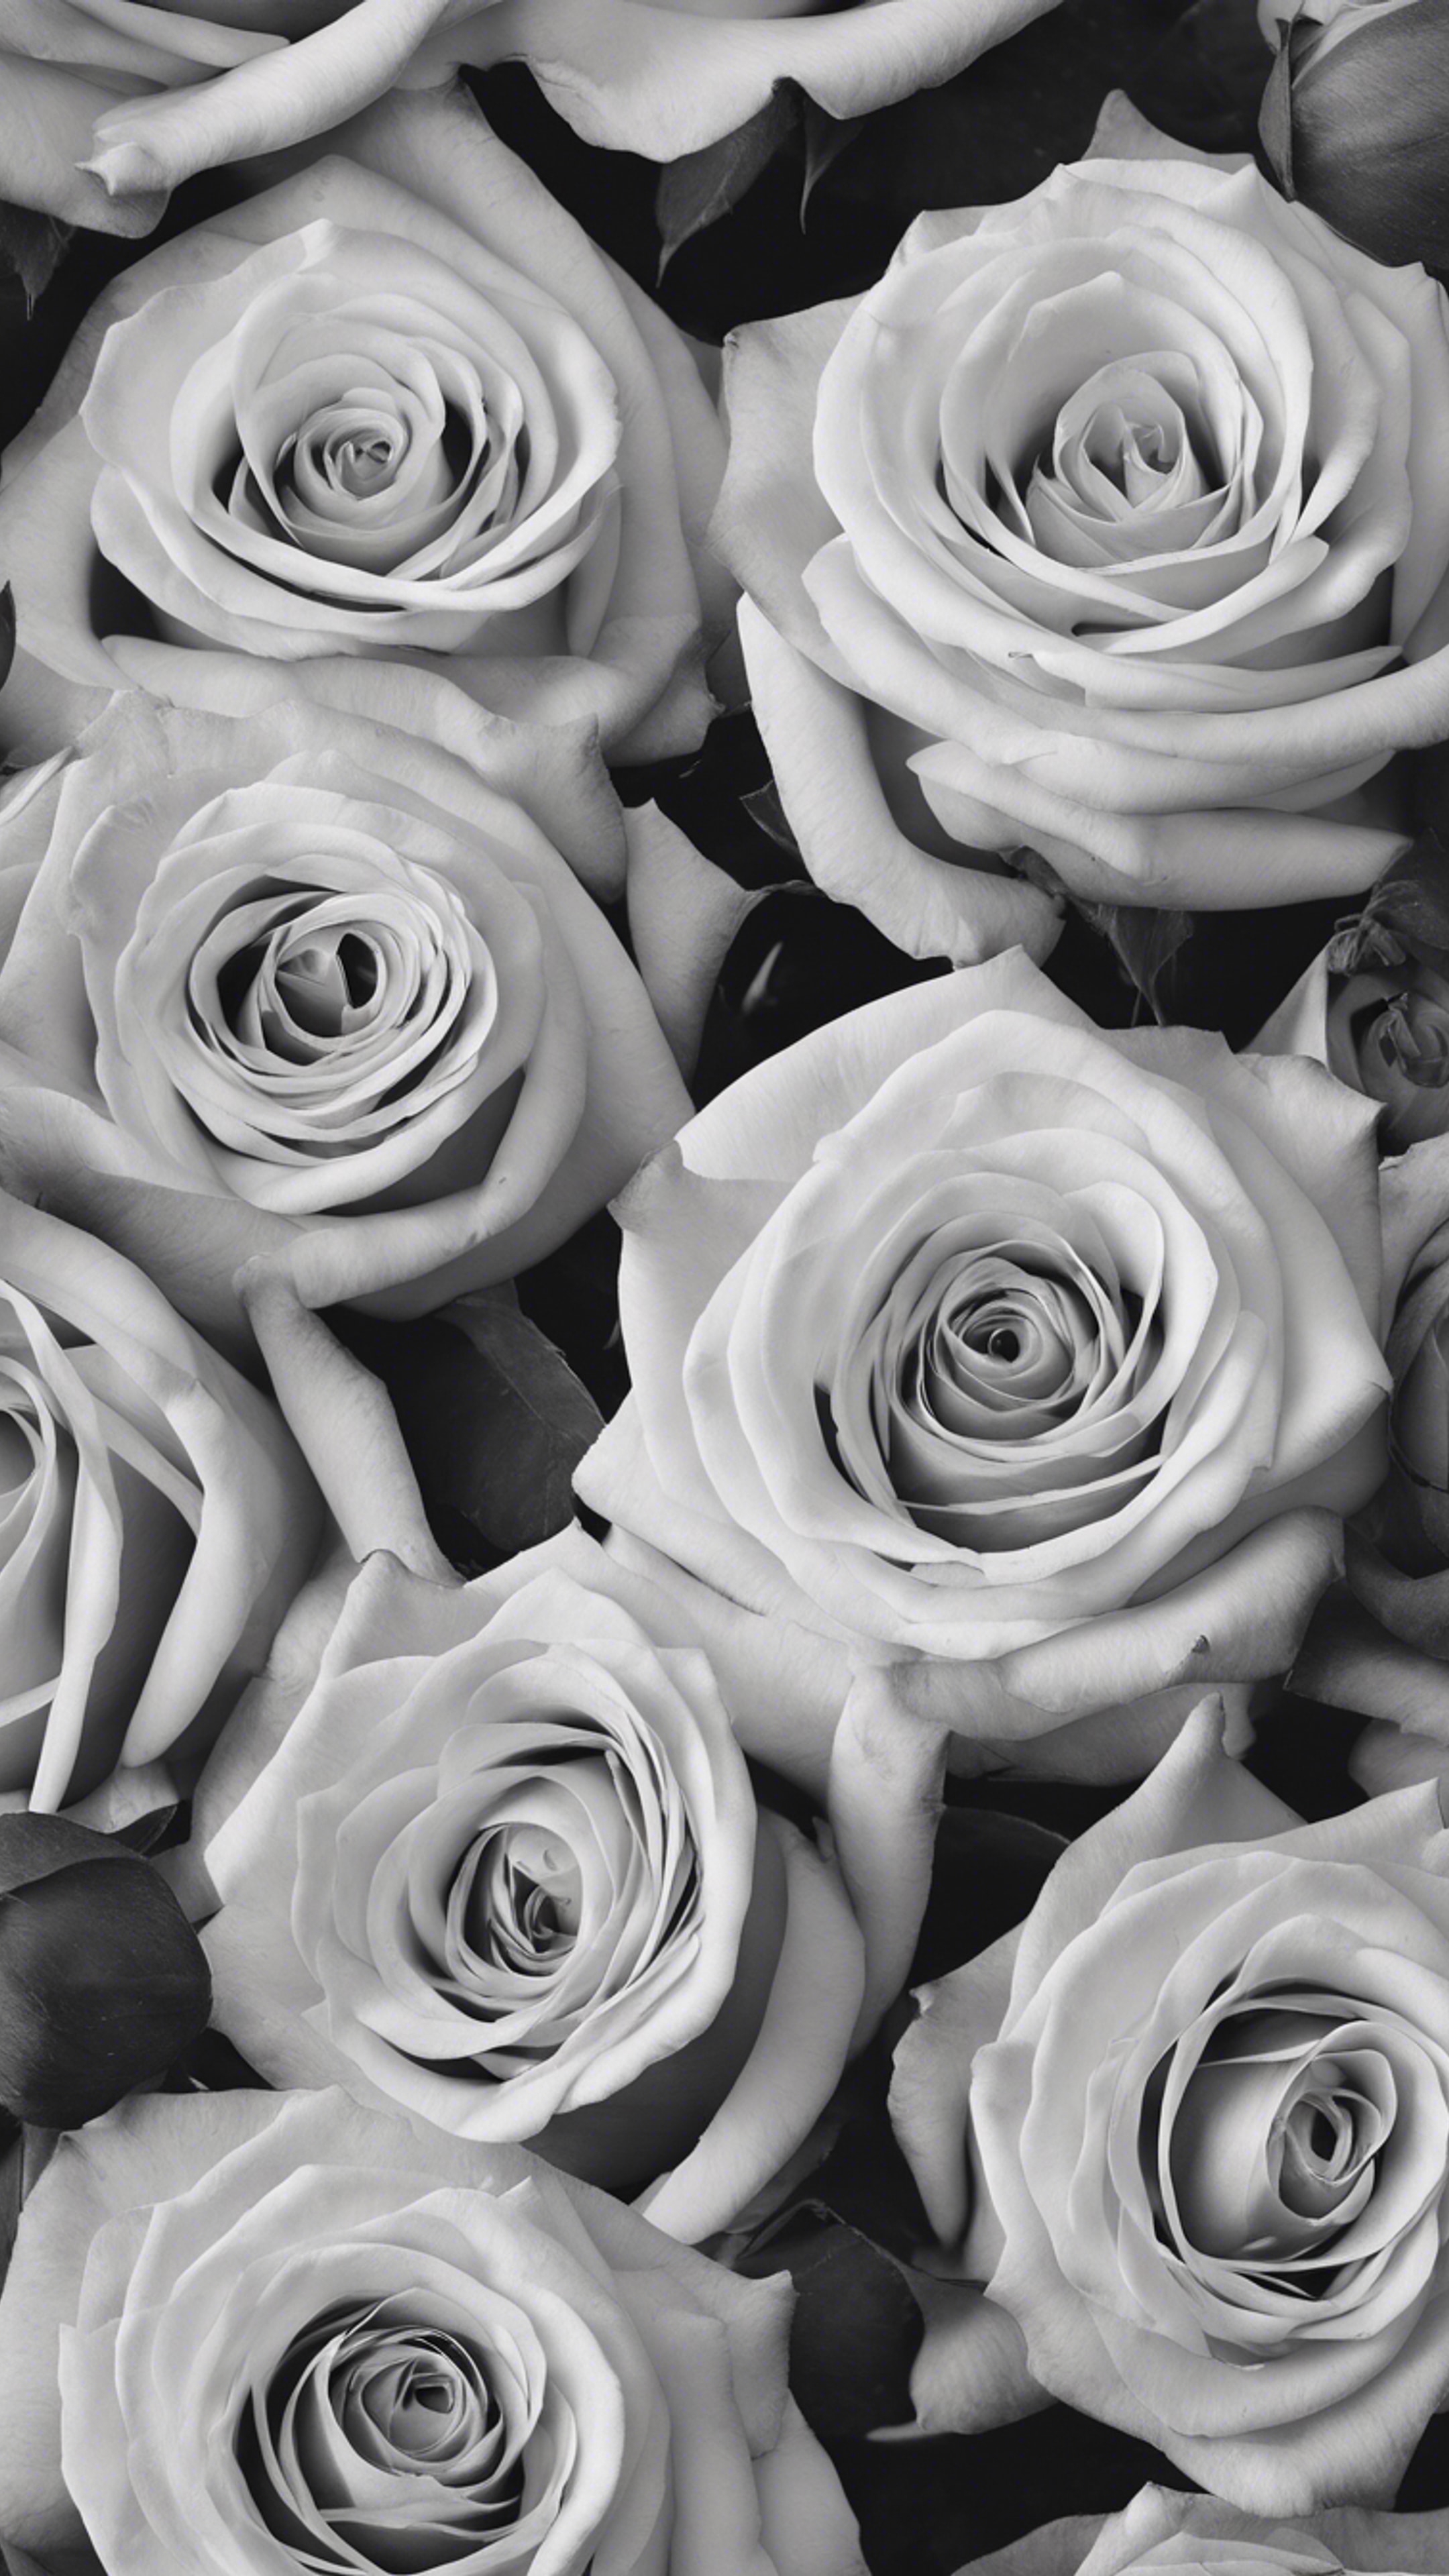 Monochromatic roses ornately arranged in a seamless pattern. Ταπετσαρία[c90b416599ba4a59a2c6]